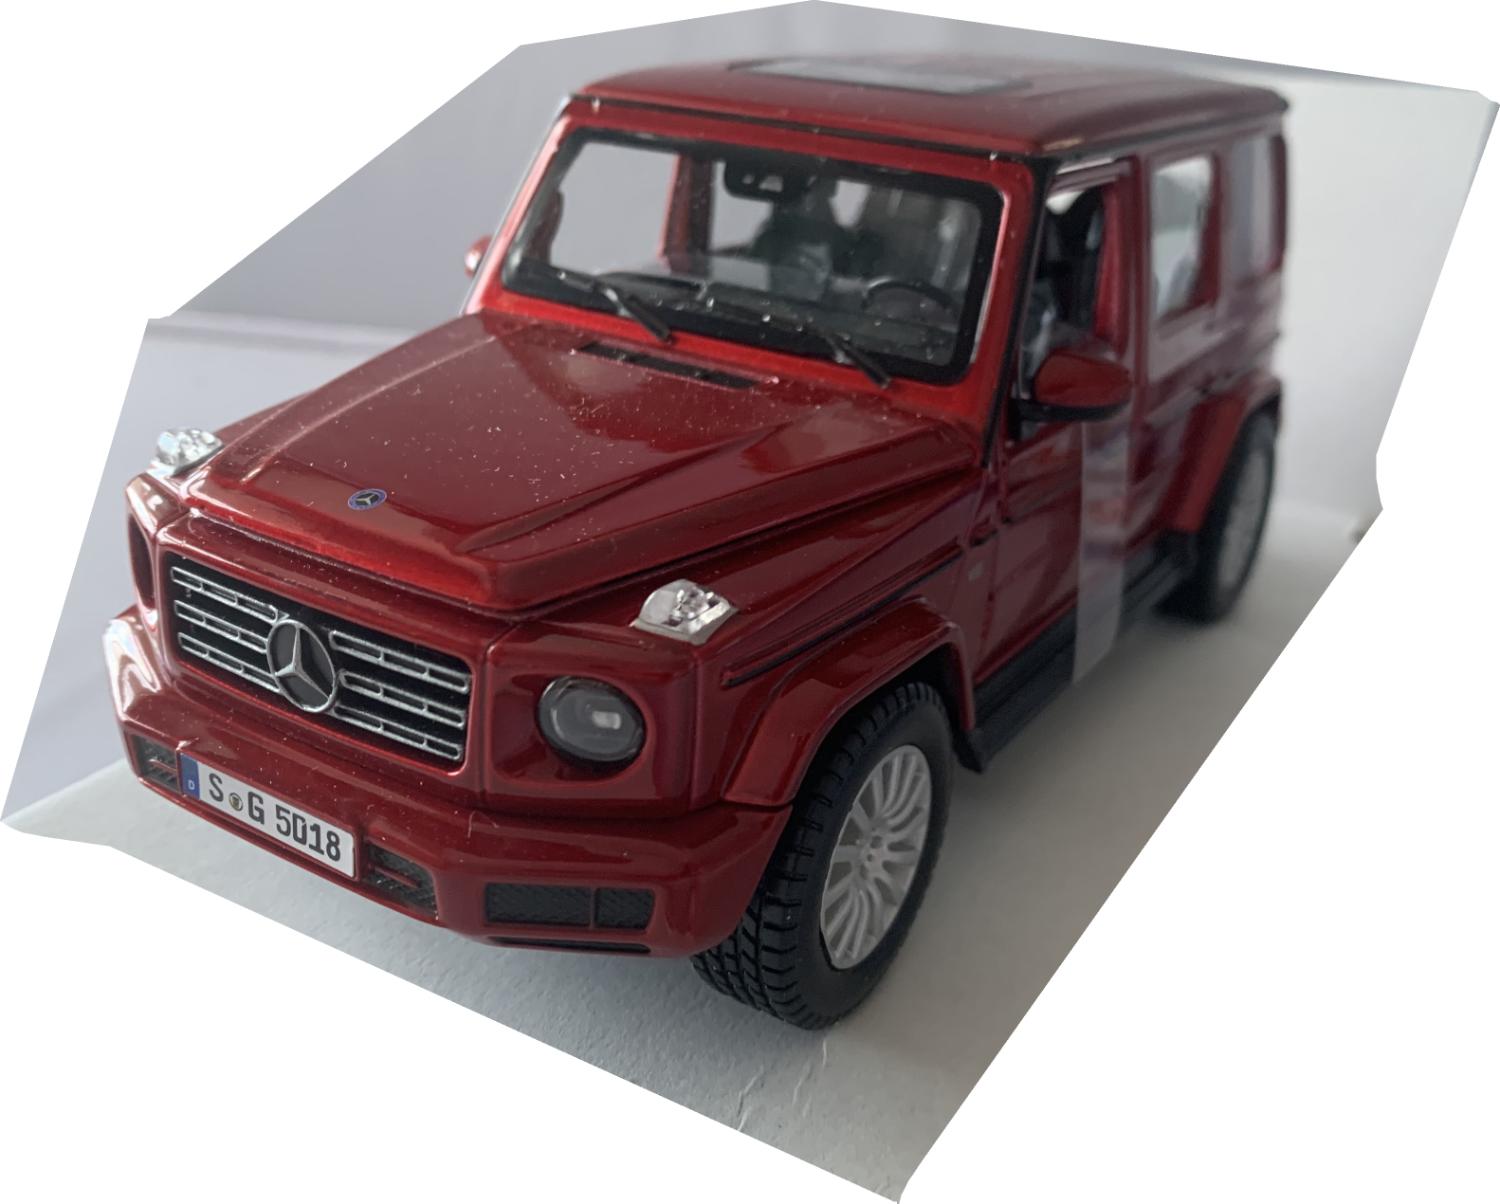 Mercedes Benz G Class 2019 in metallic red 1:24 scale diecast model from Maisto